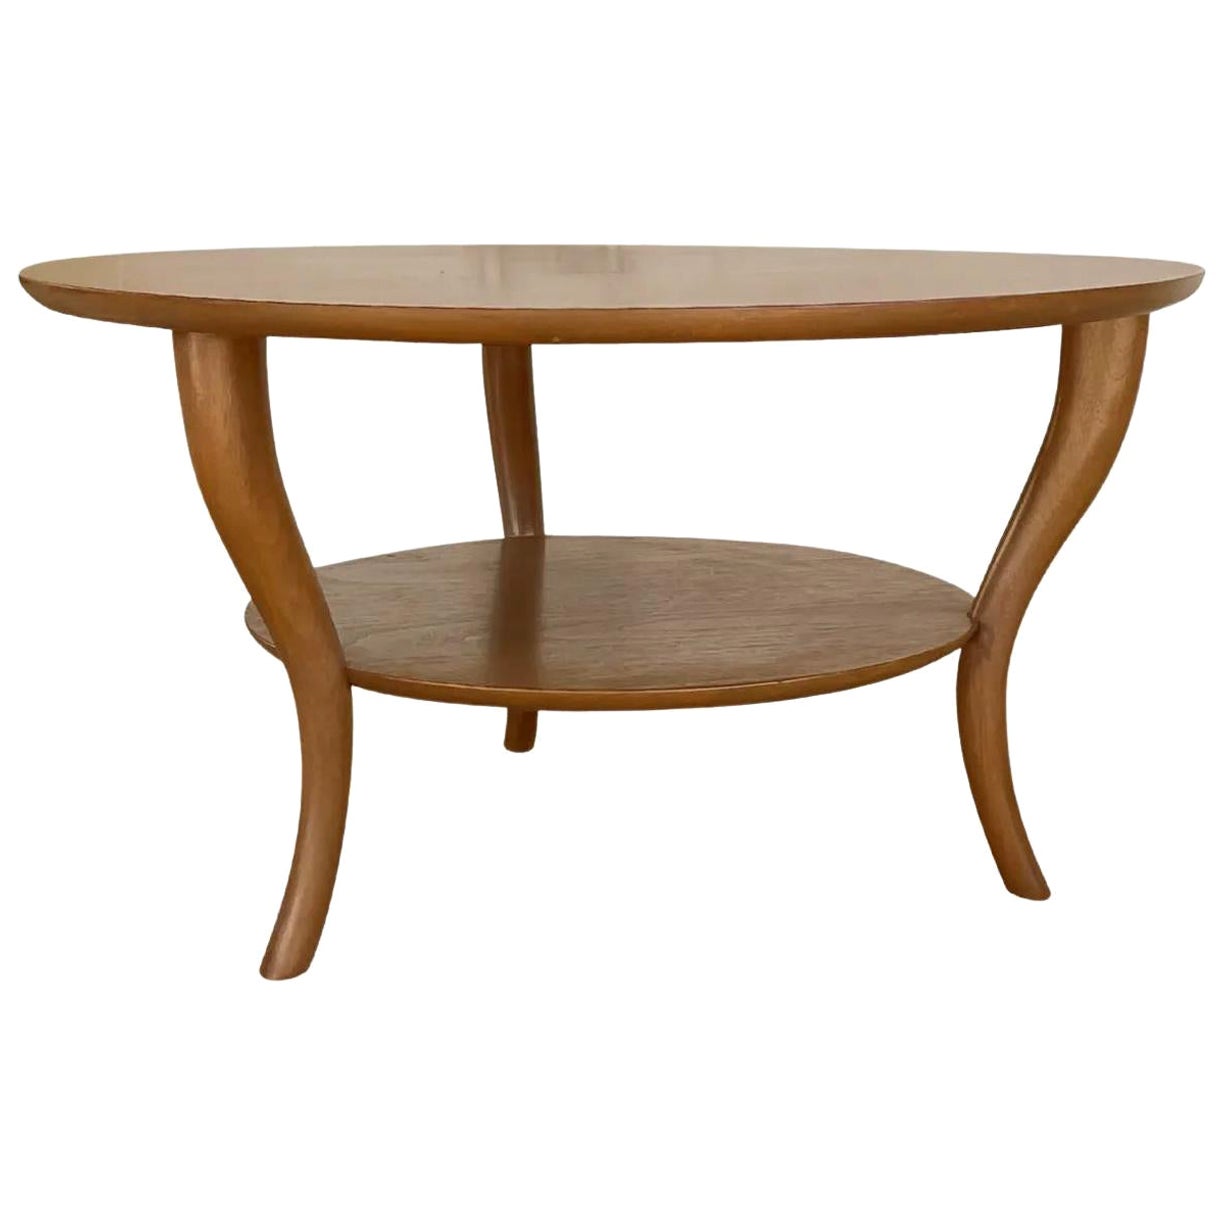 20th Century American Widdicomb Walnut Cocktail Table by T.H. Robsjohn-Gibbings For Sale